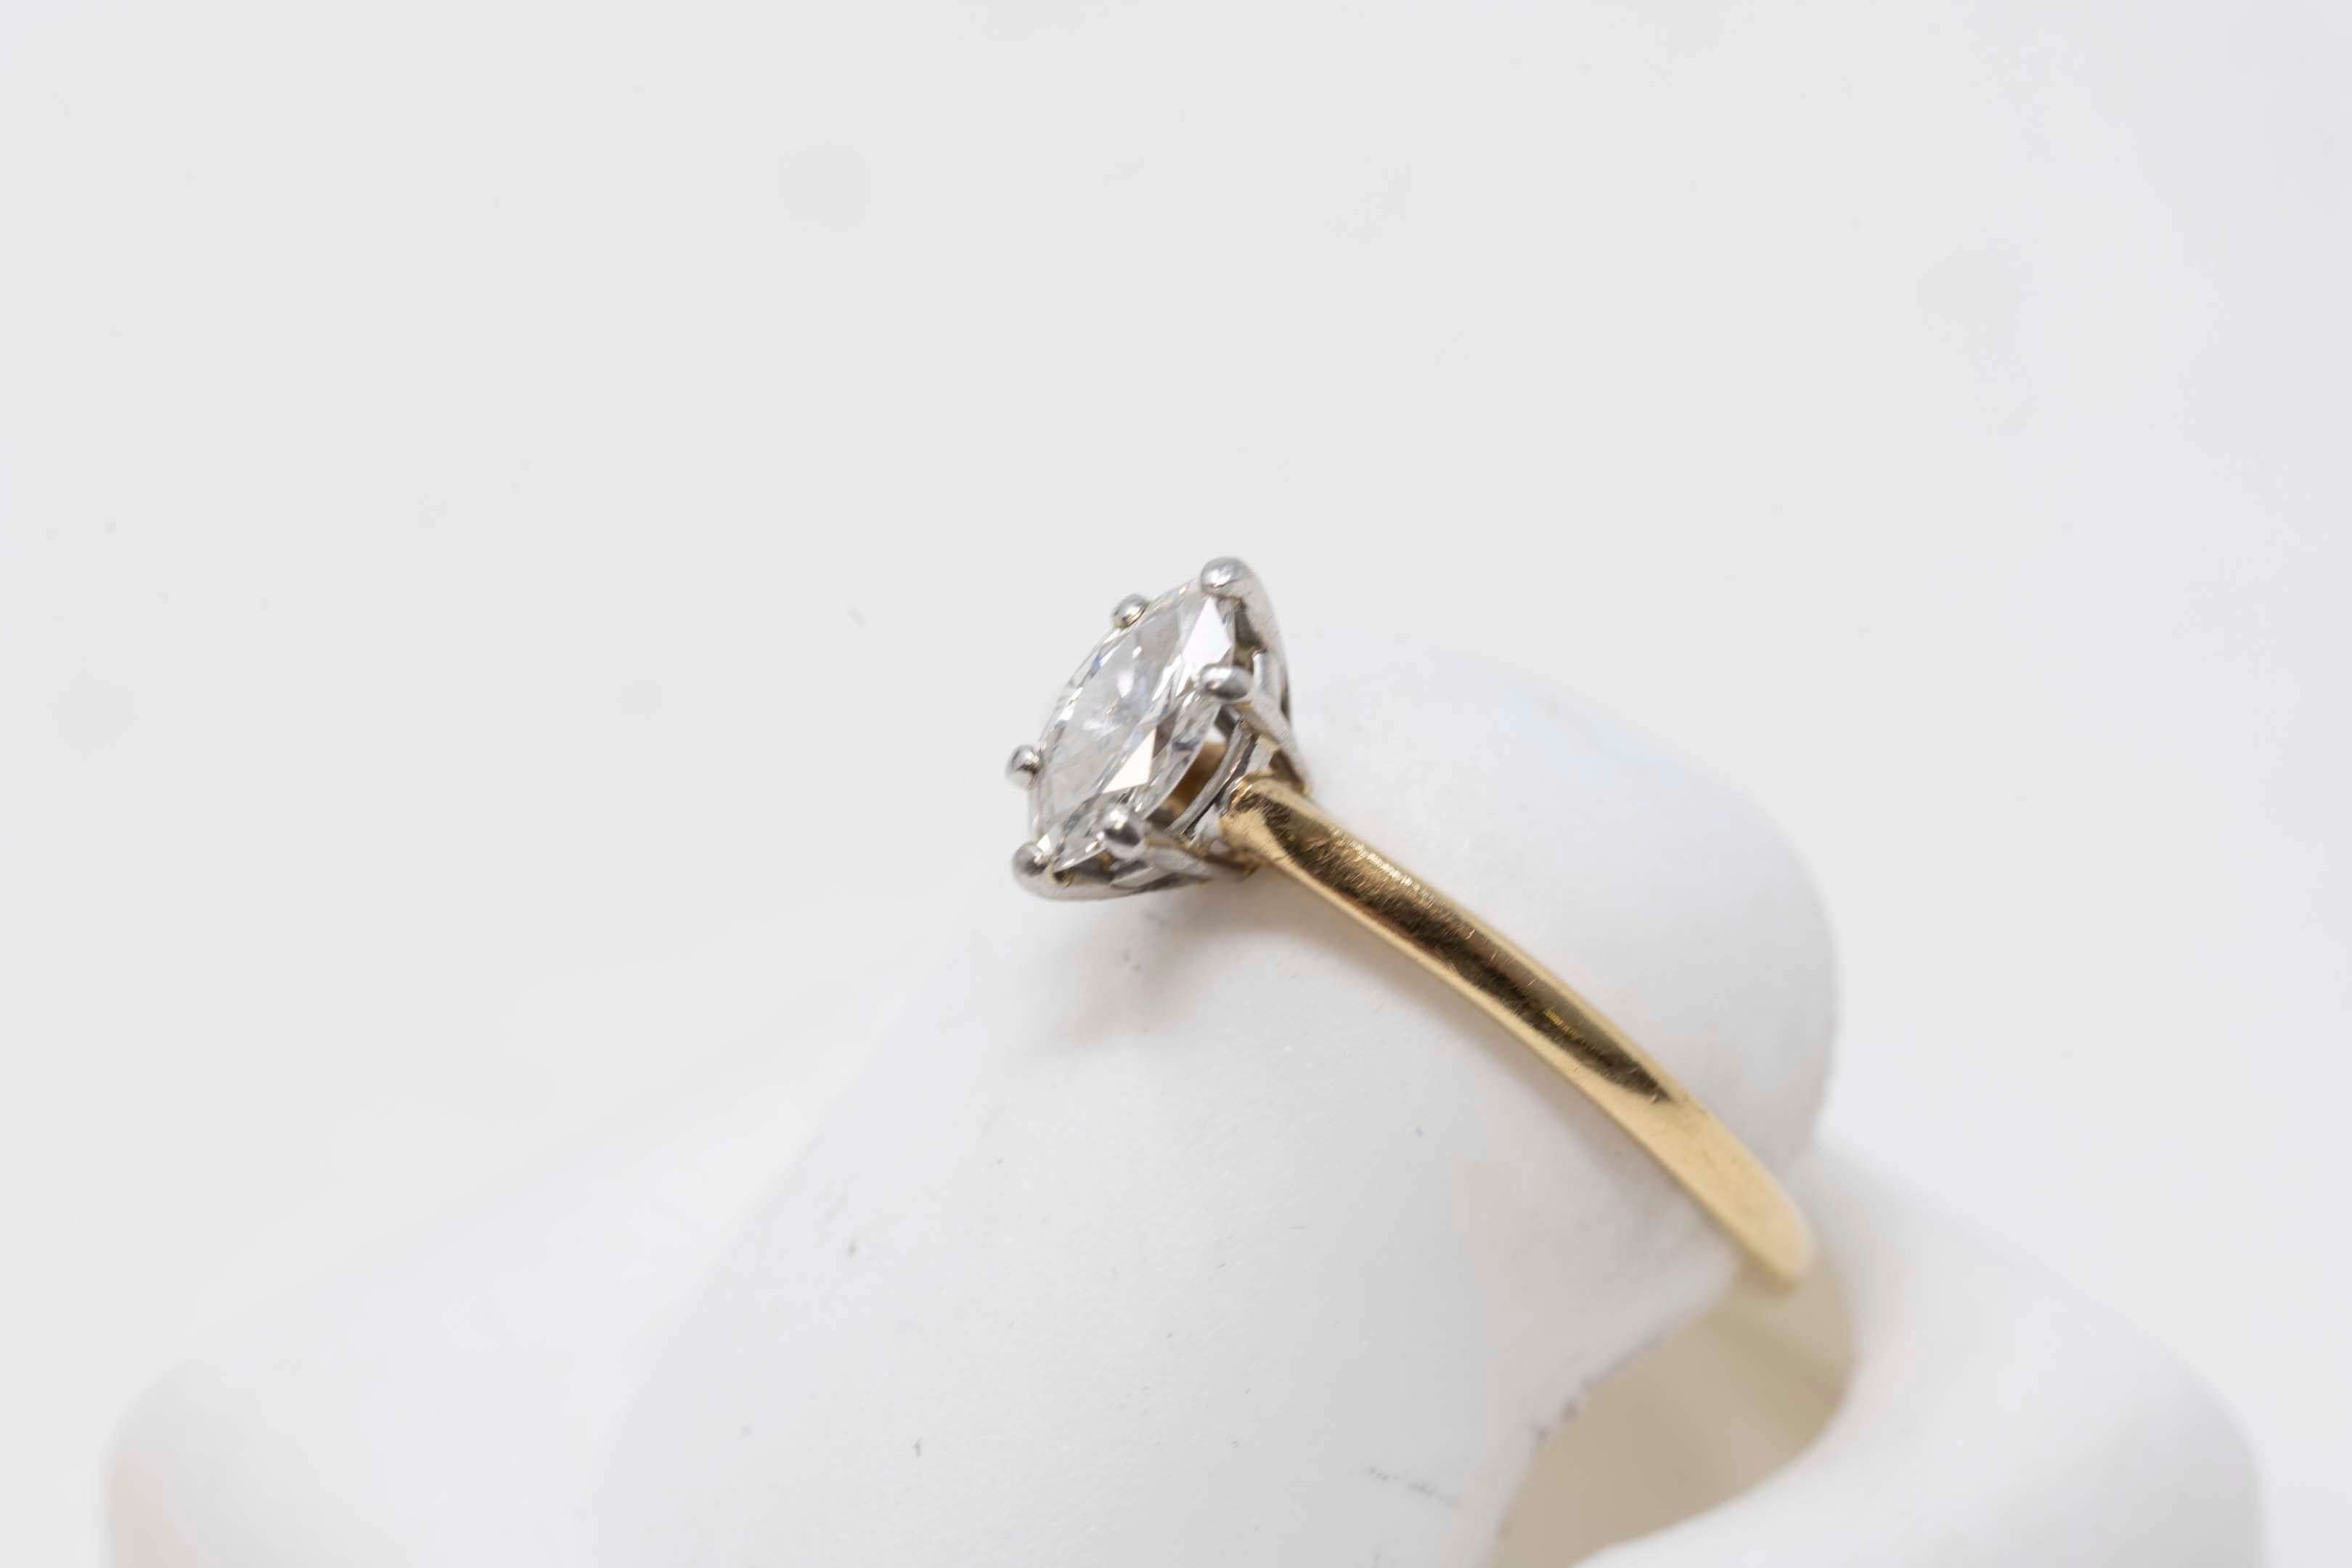 Ladies ring in 18k yellow gold and platinum (stamped) modern style, solitaire model, plain finish. Size 7.75, makers mark Birks, total weight of ring 2 grams. The ring is set with one marquise shaped brilliant cut diamond. Weighs approximately .35